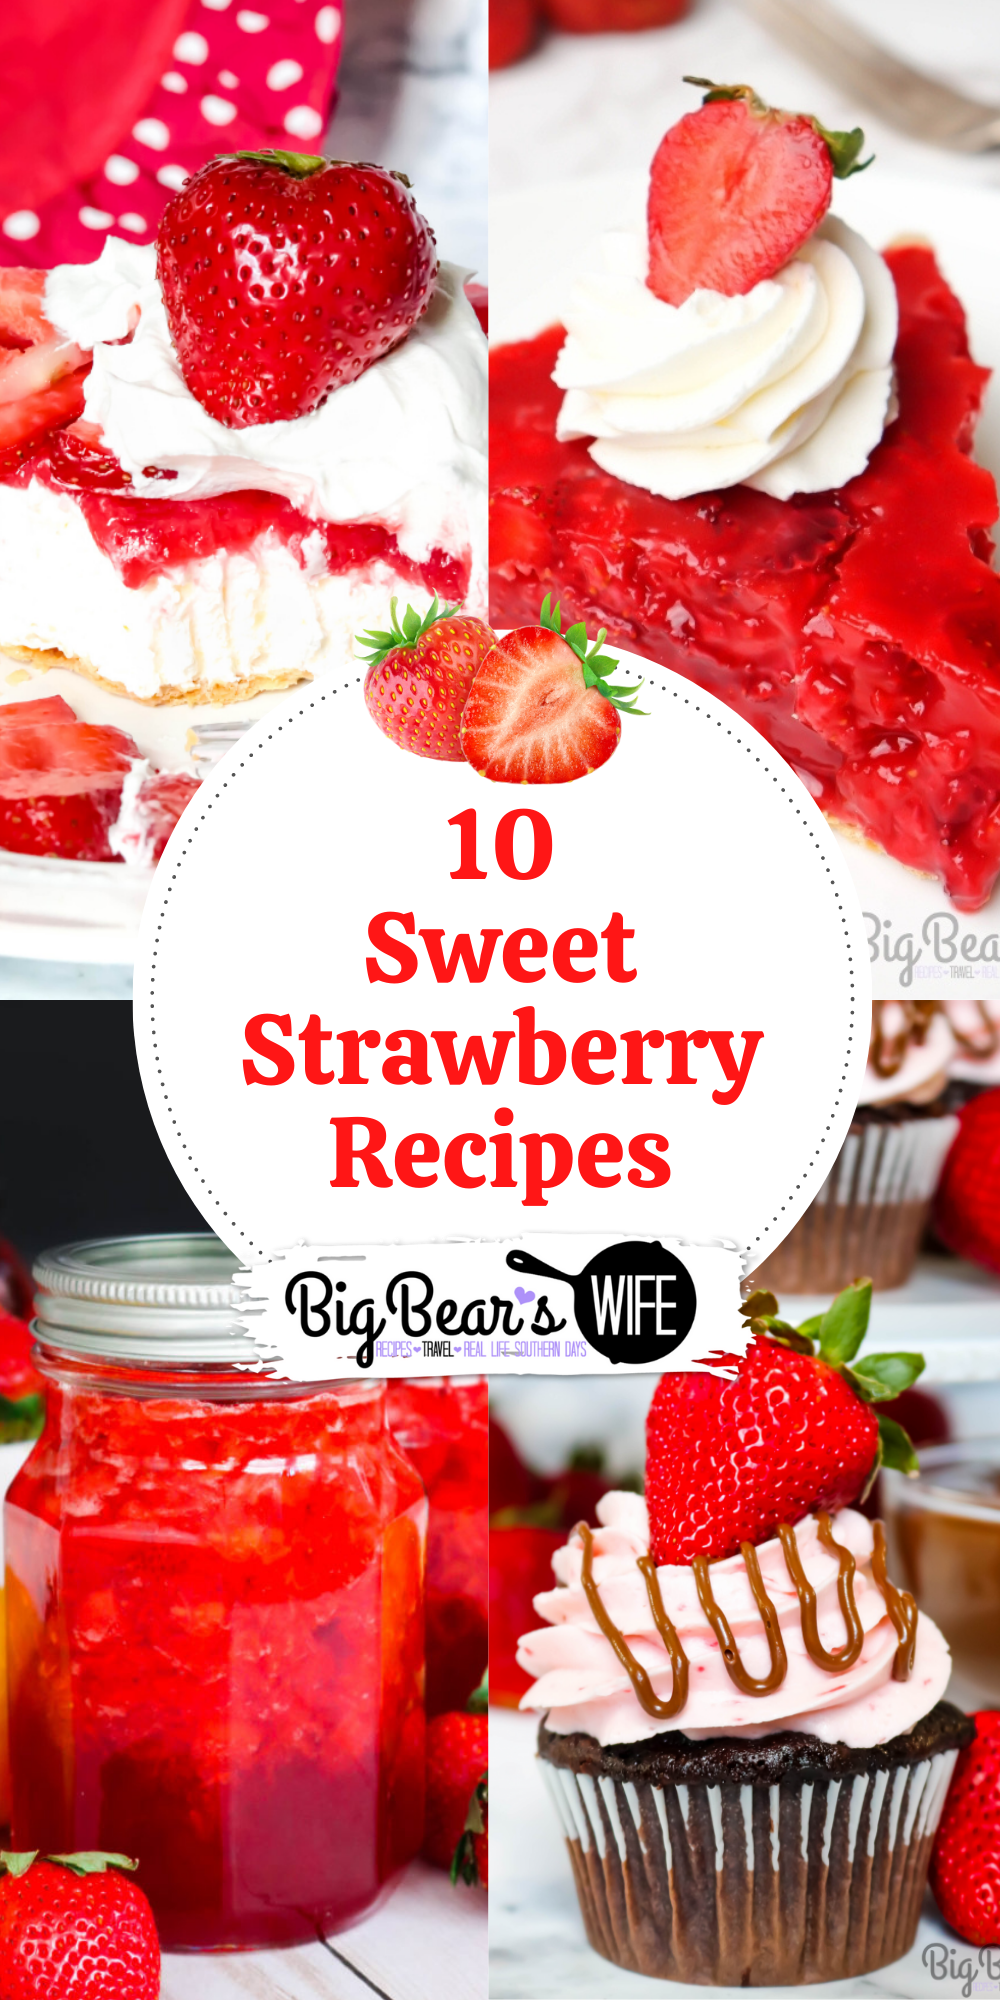 Summer weather is here which means it is time for tons of strawberry recipes! Here you'll find 10 sweet strawberry recipes that are perfect for those ripe summer strawberries!  via @bigbearswife